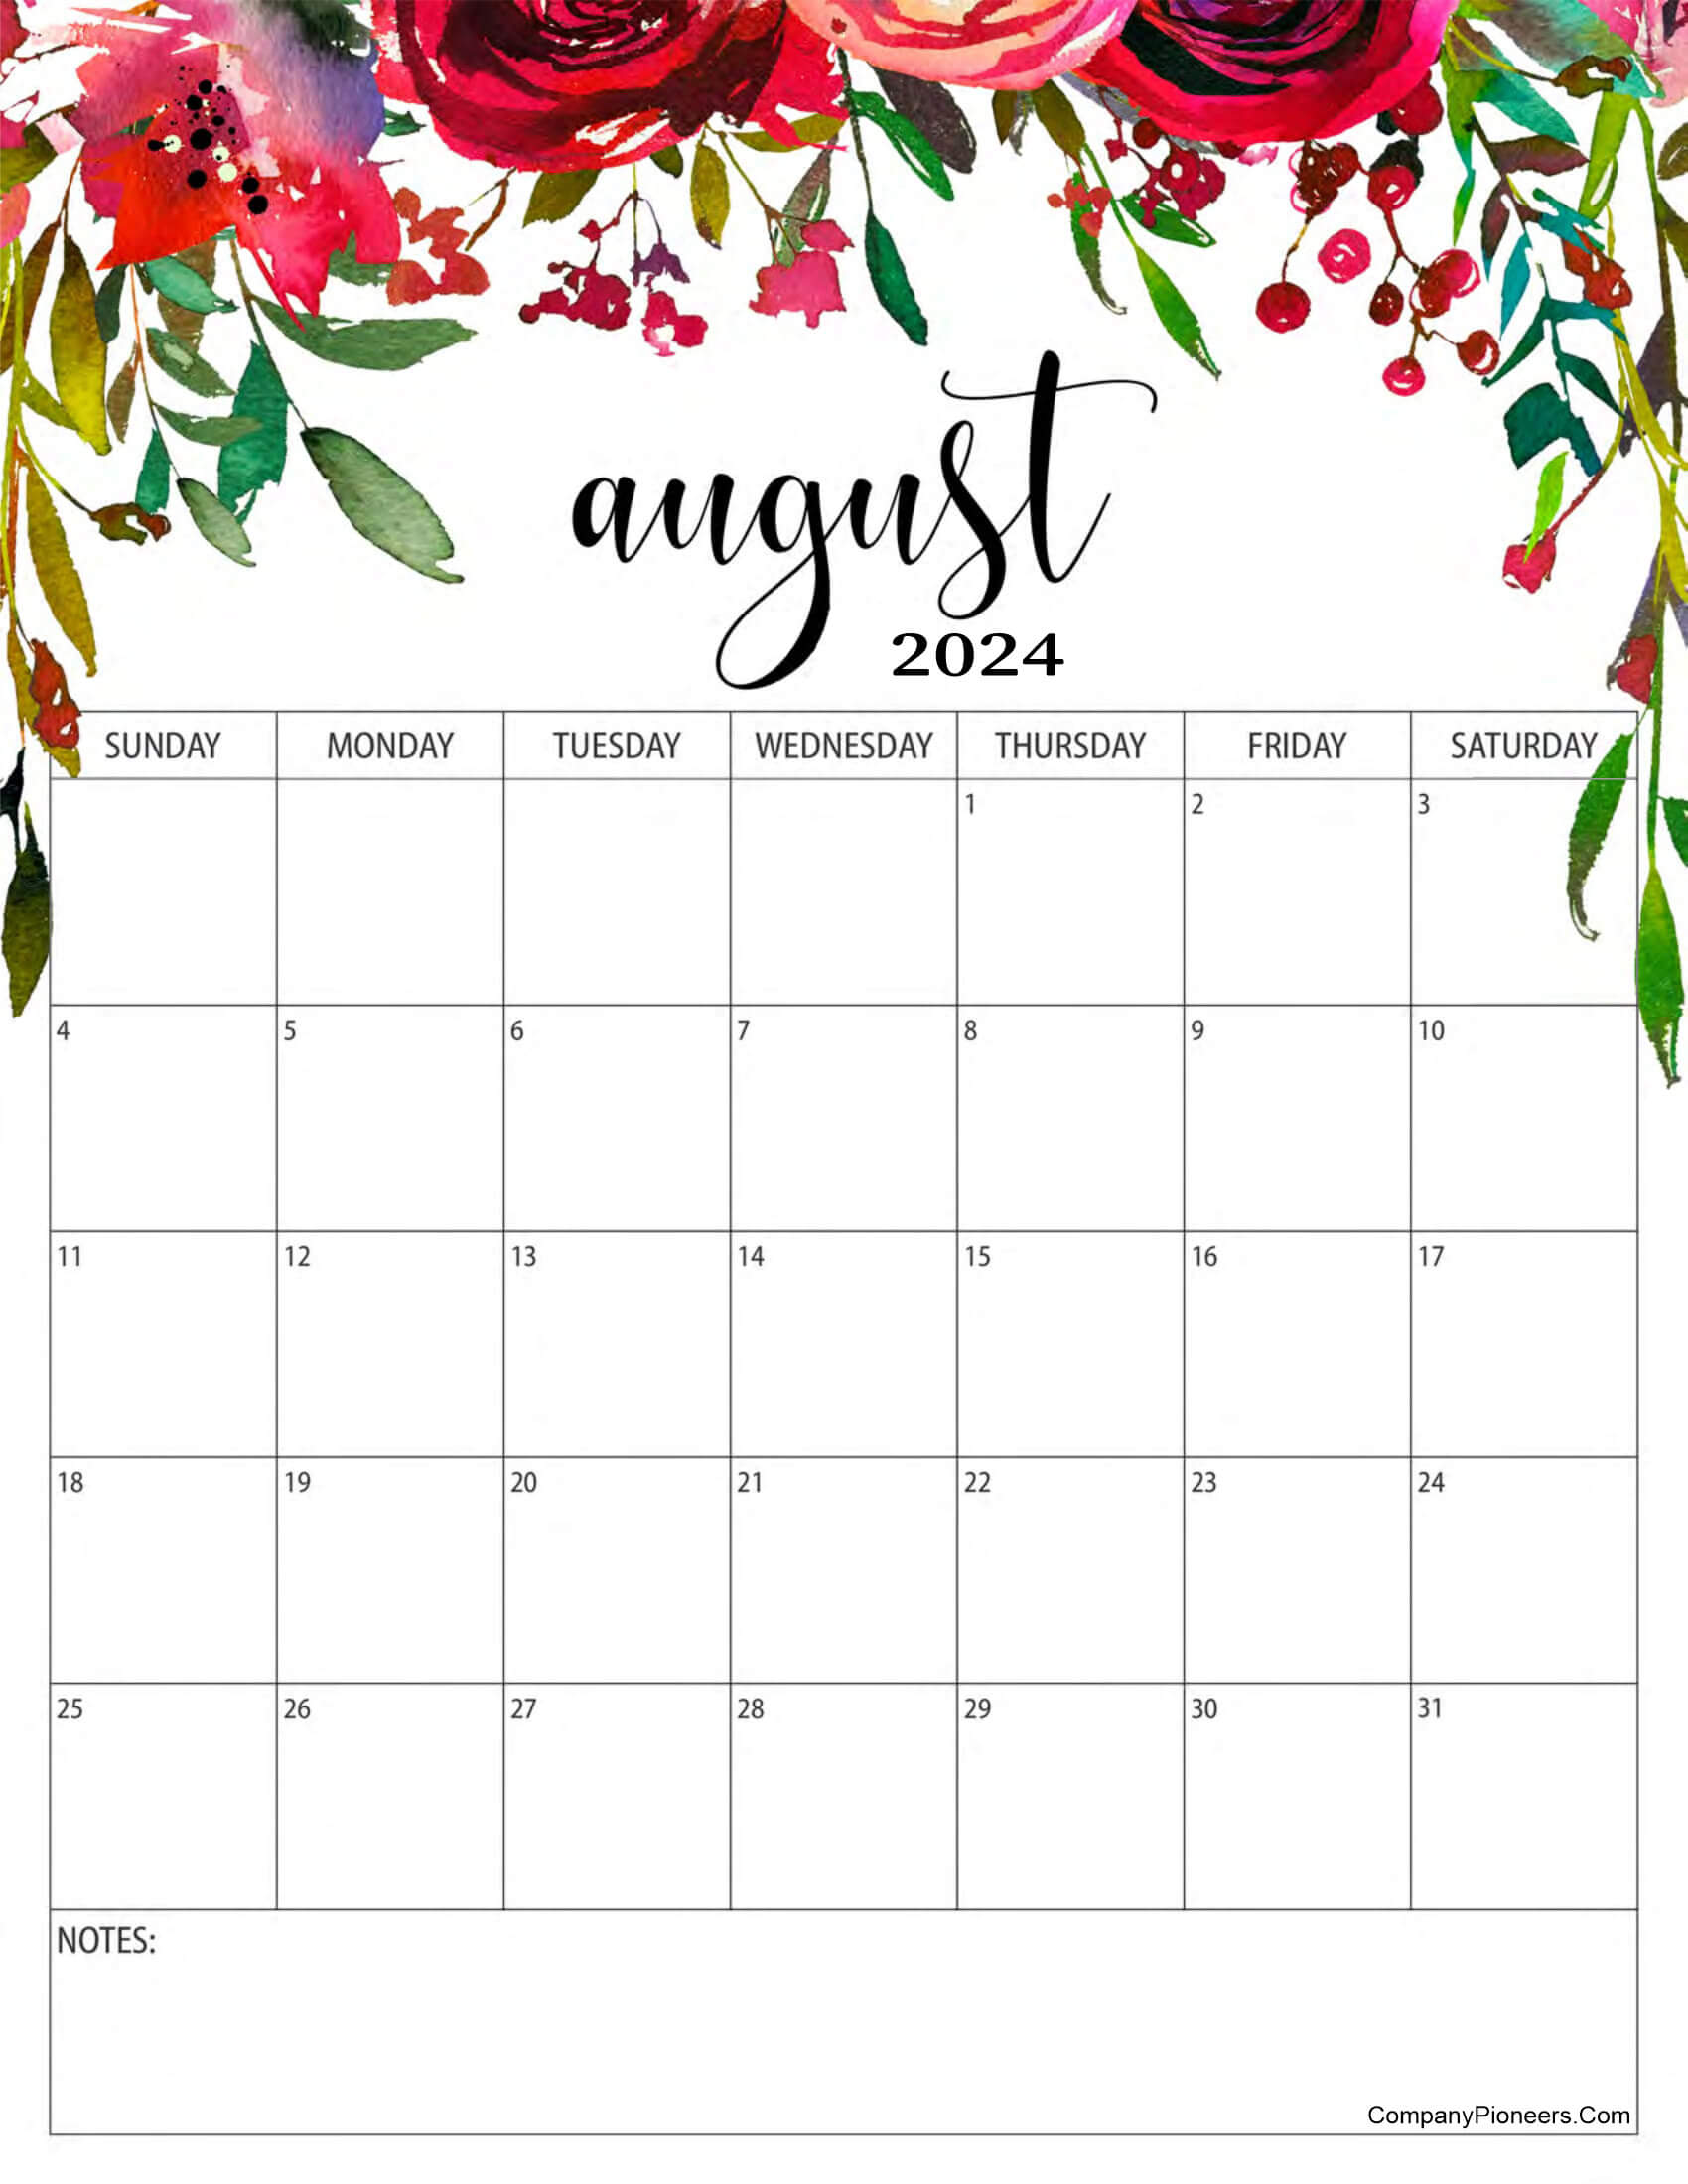 Red Roses Flower August 2024 Calendar with Notes